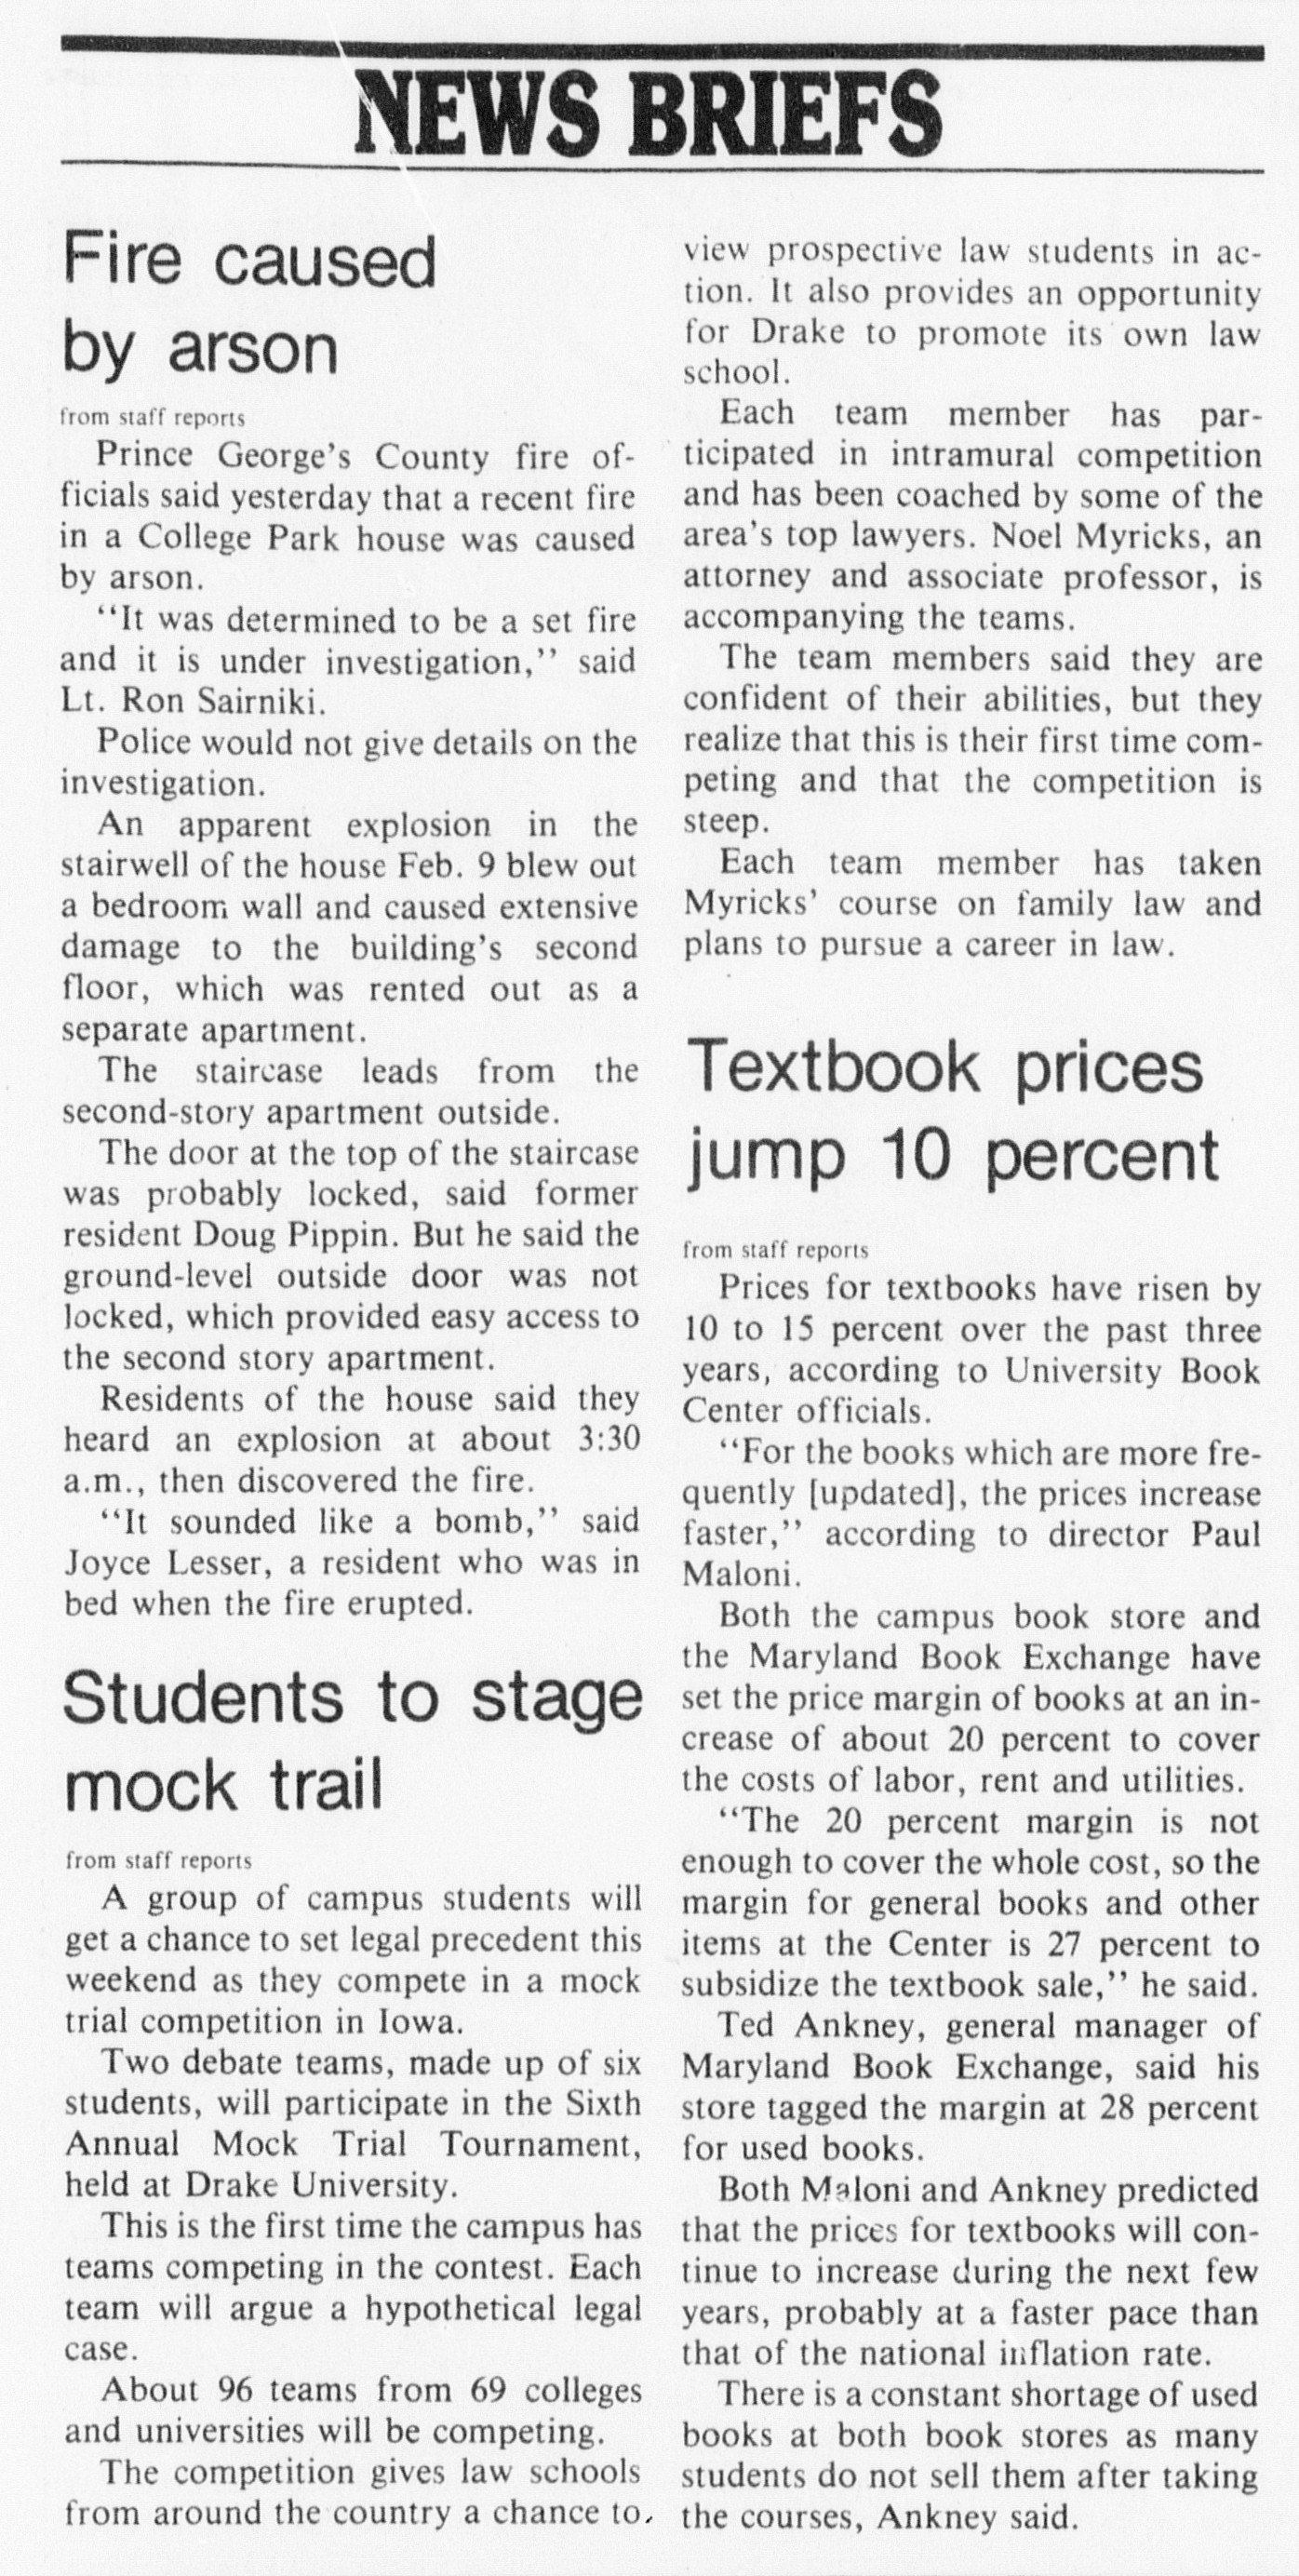 DBK 1990 First Year Competing Article  2.16.1990.jpg